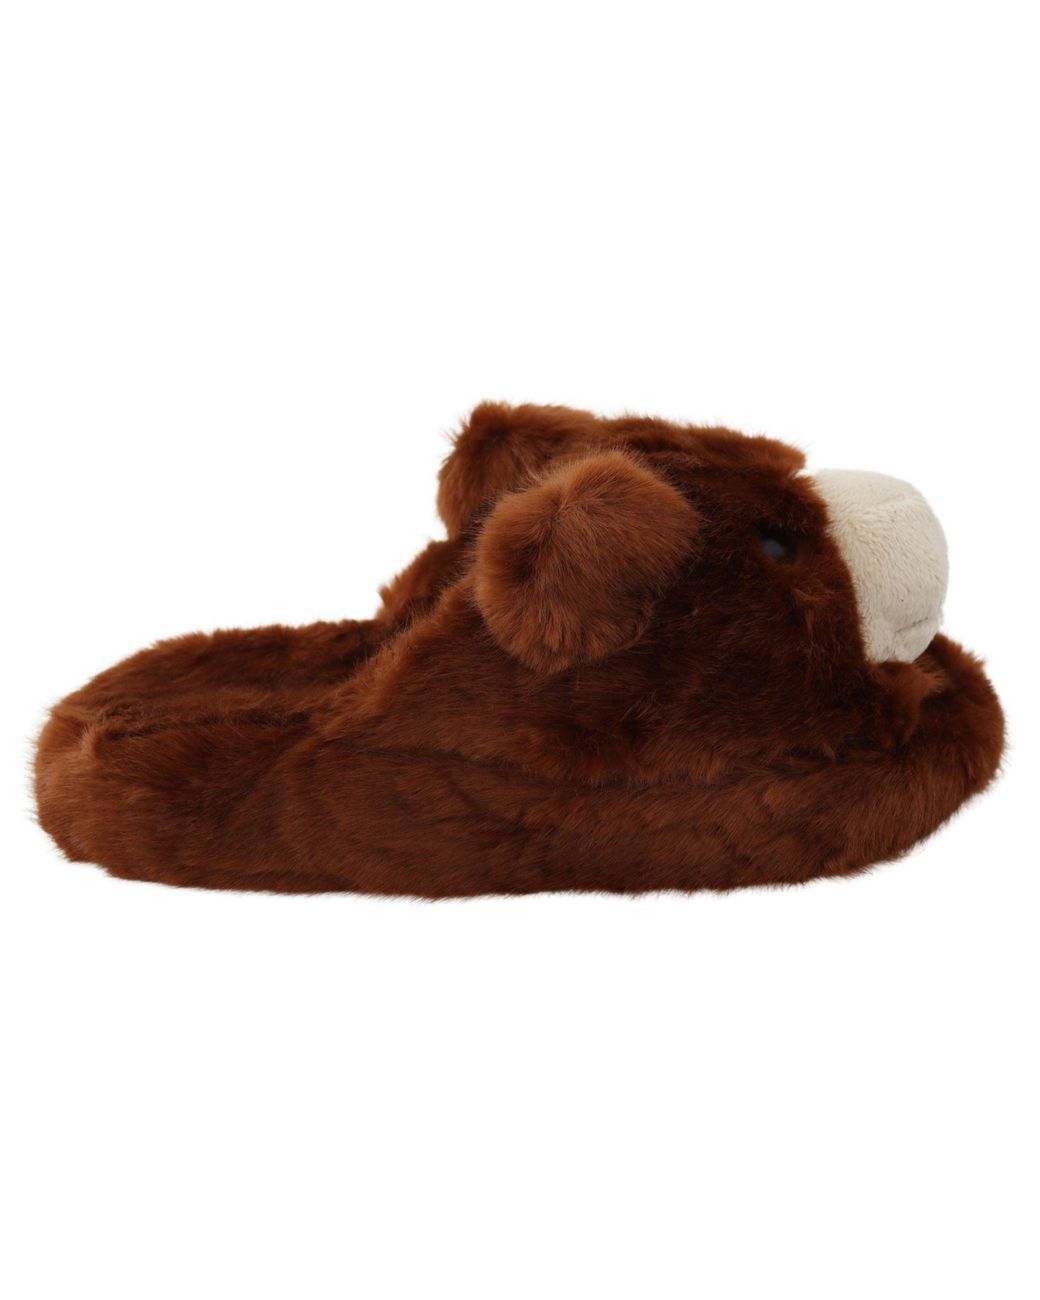 Dolce & Gabbana Teddy Bear Slippers Sandals Shoes in Brown for Men Mens Shoes Slip-on shoes Slippers Save 24% 